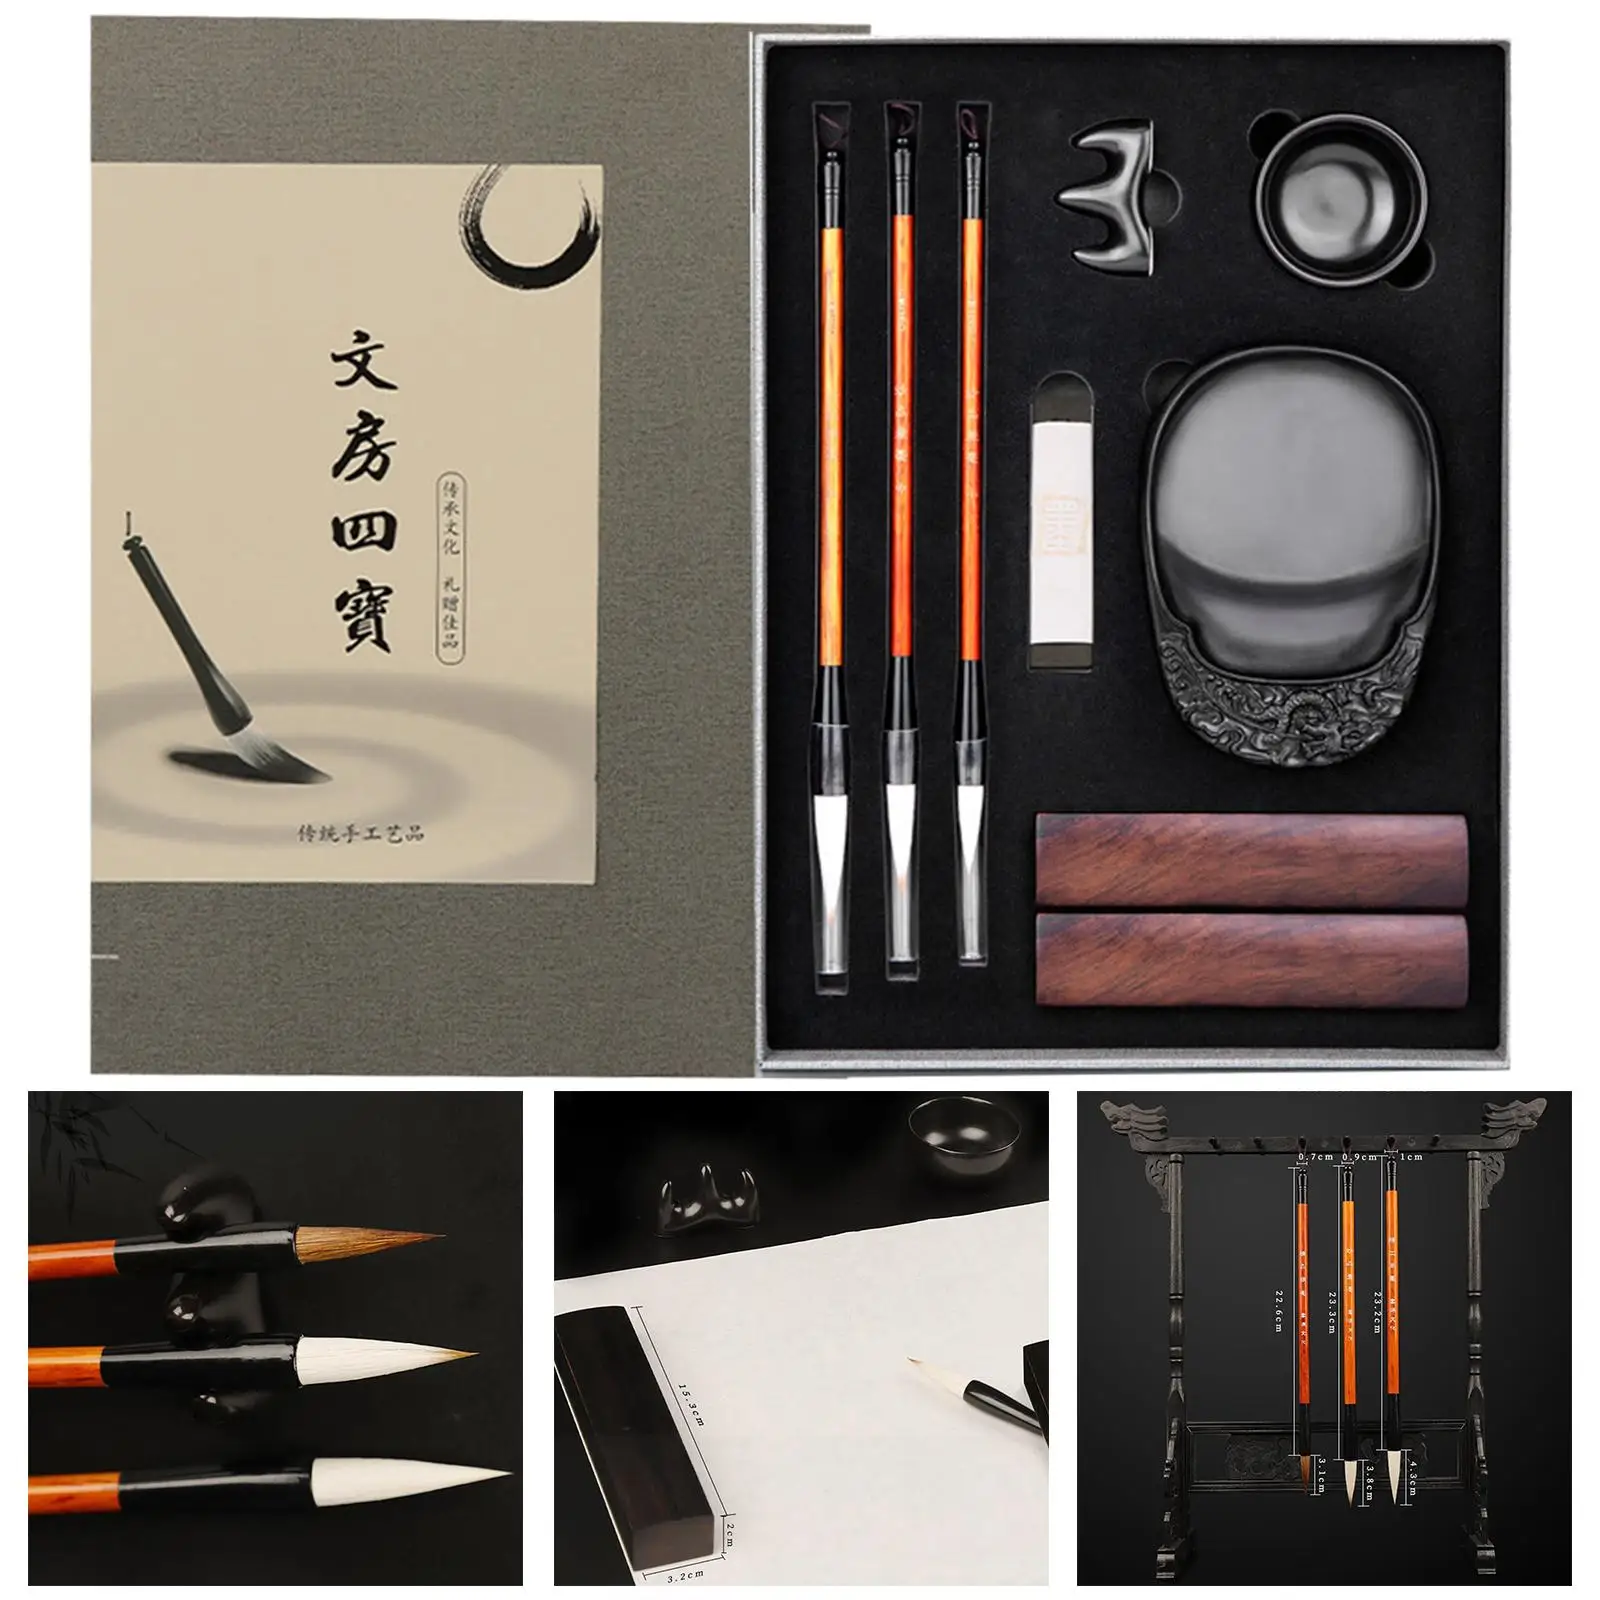 Four Treasures of The Study of Ink Painting Writing Tools to